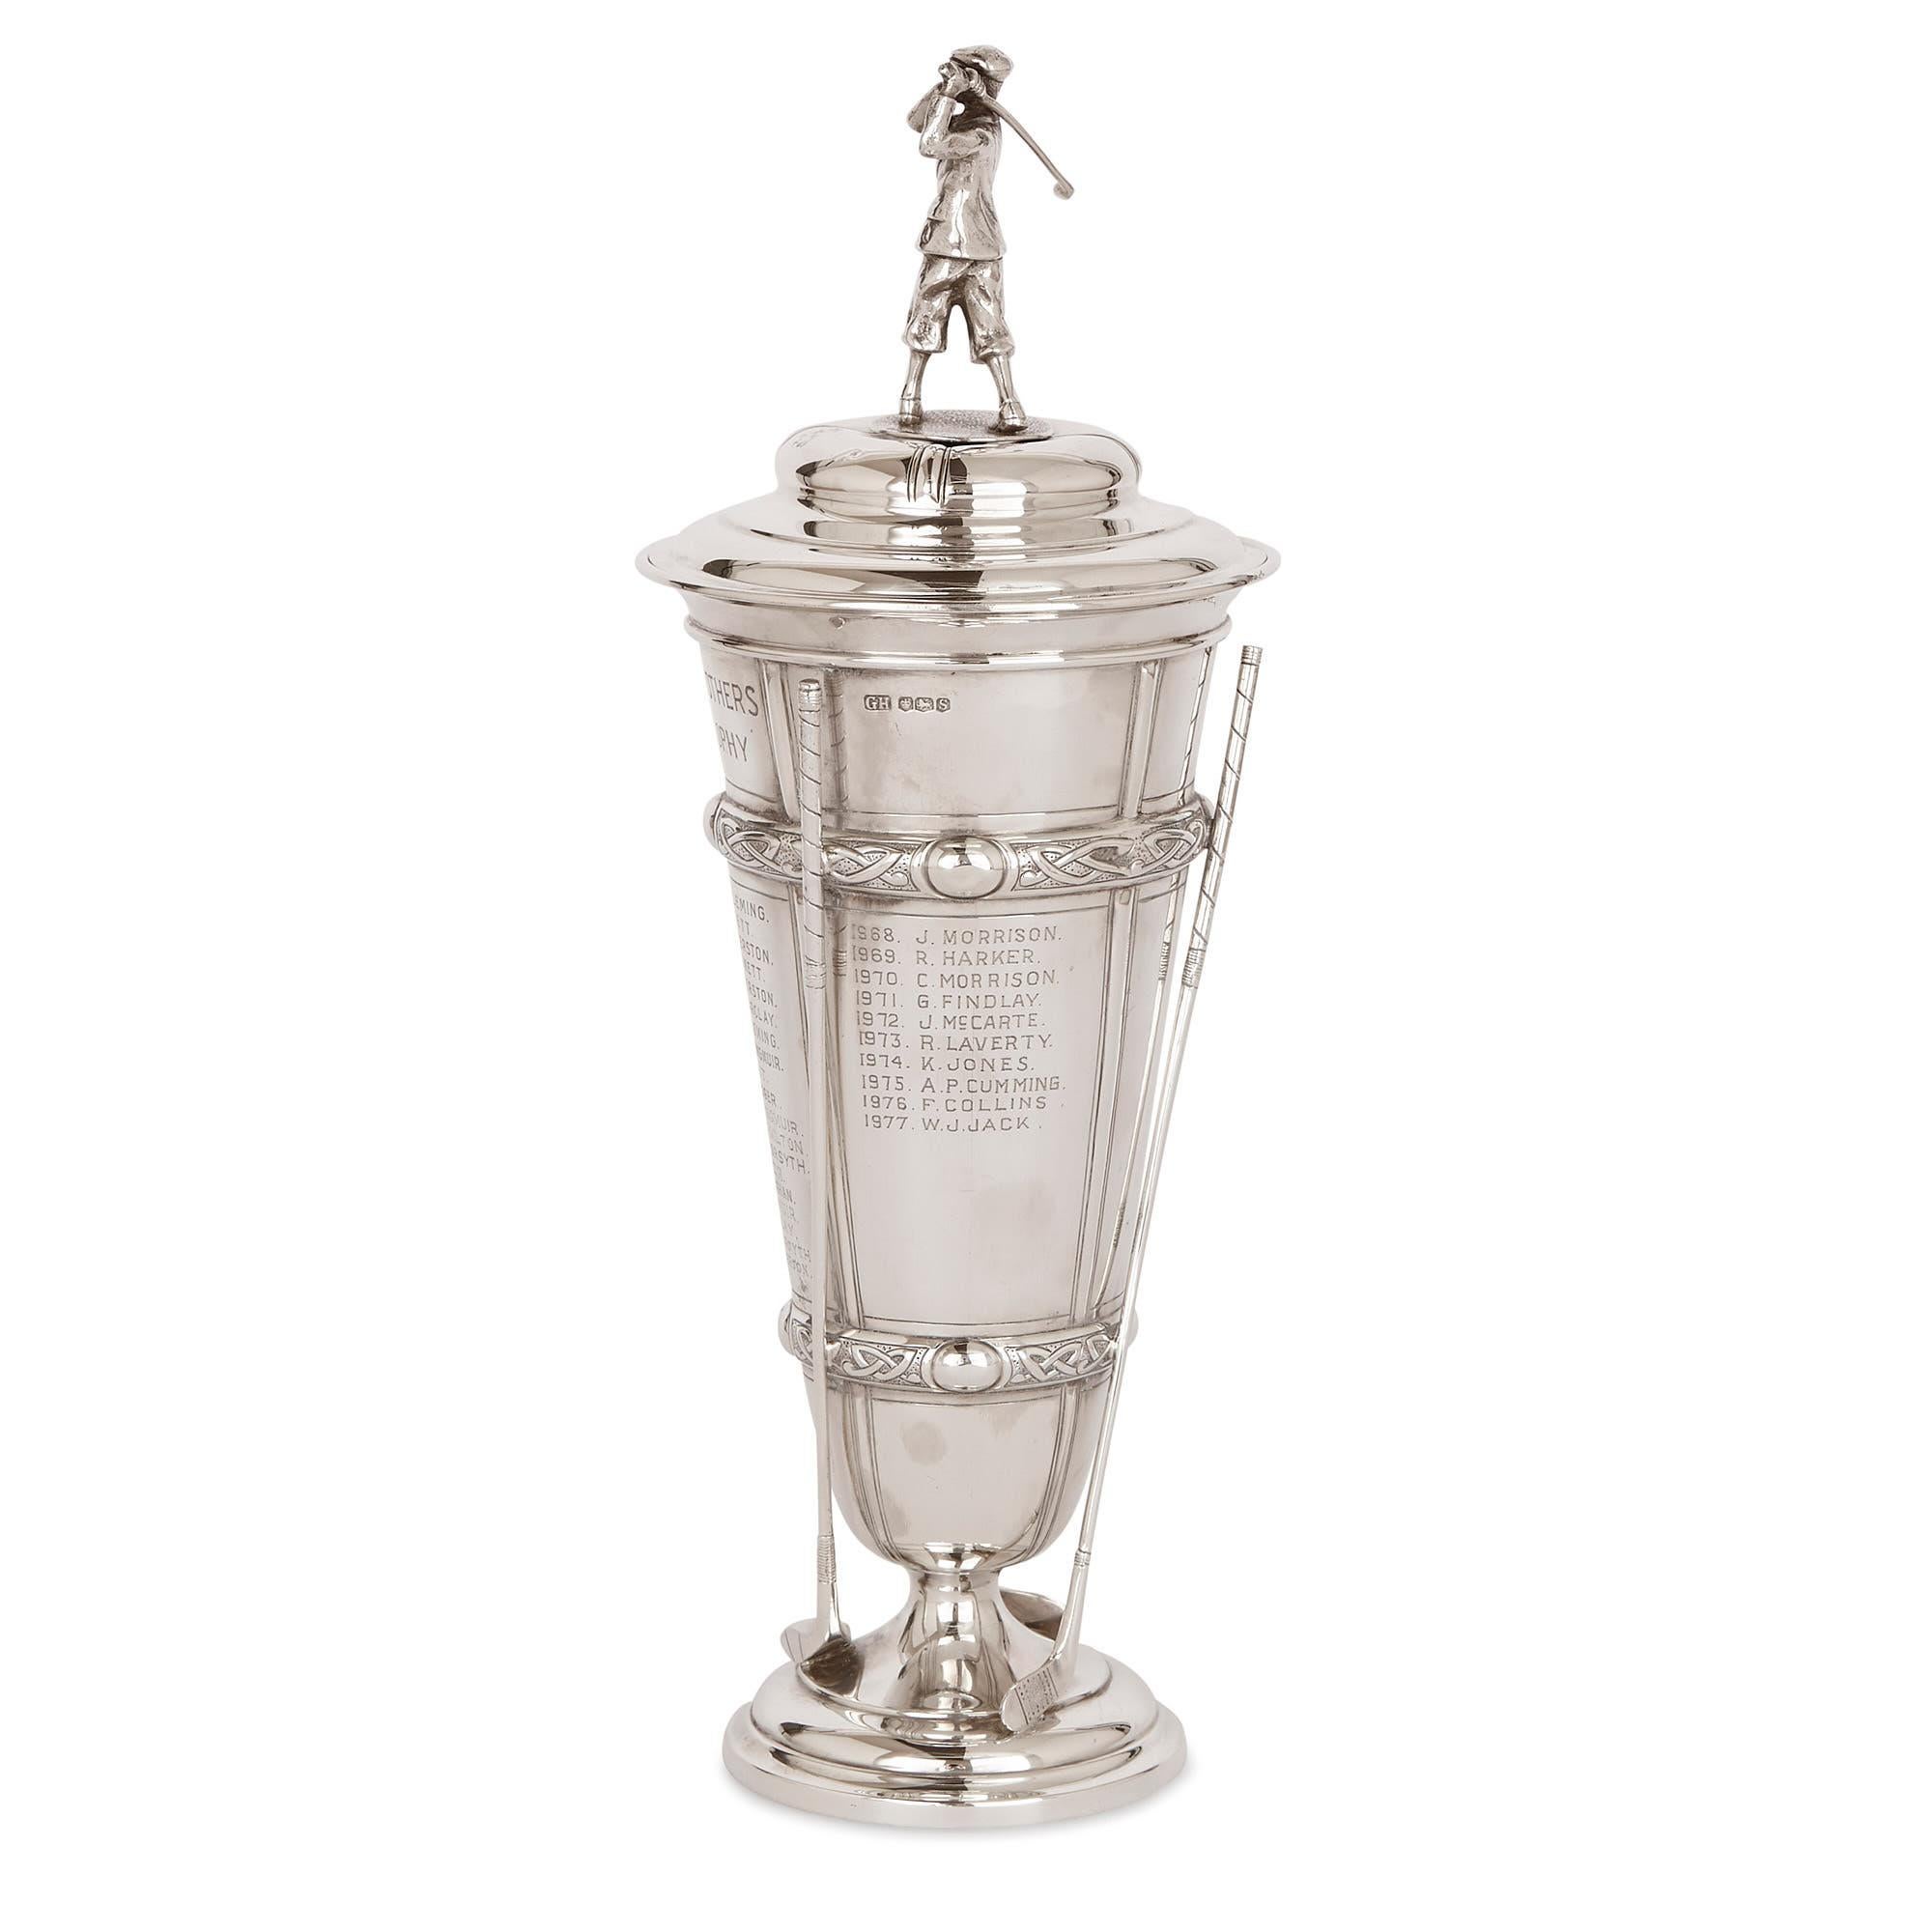 This silver cup is a wonderful piece of sporting memorabilia. The cup was presented to the winner of an annual golf tournament, which took place between 1936-1977. 

The cup is shaped like a vase, with a tall, tapered body, which stands on a